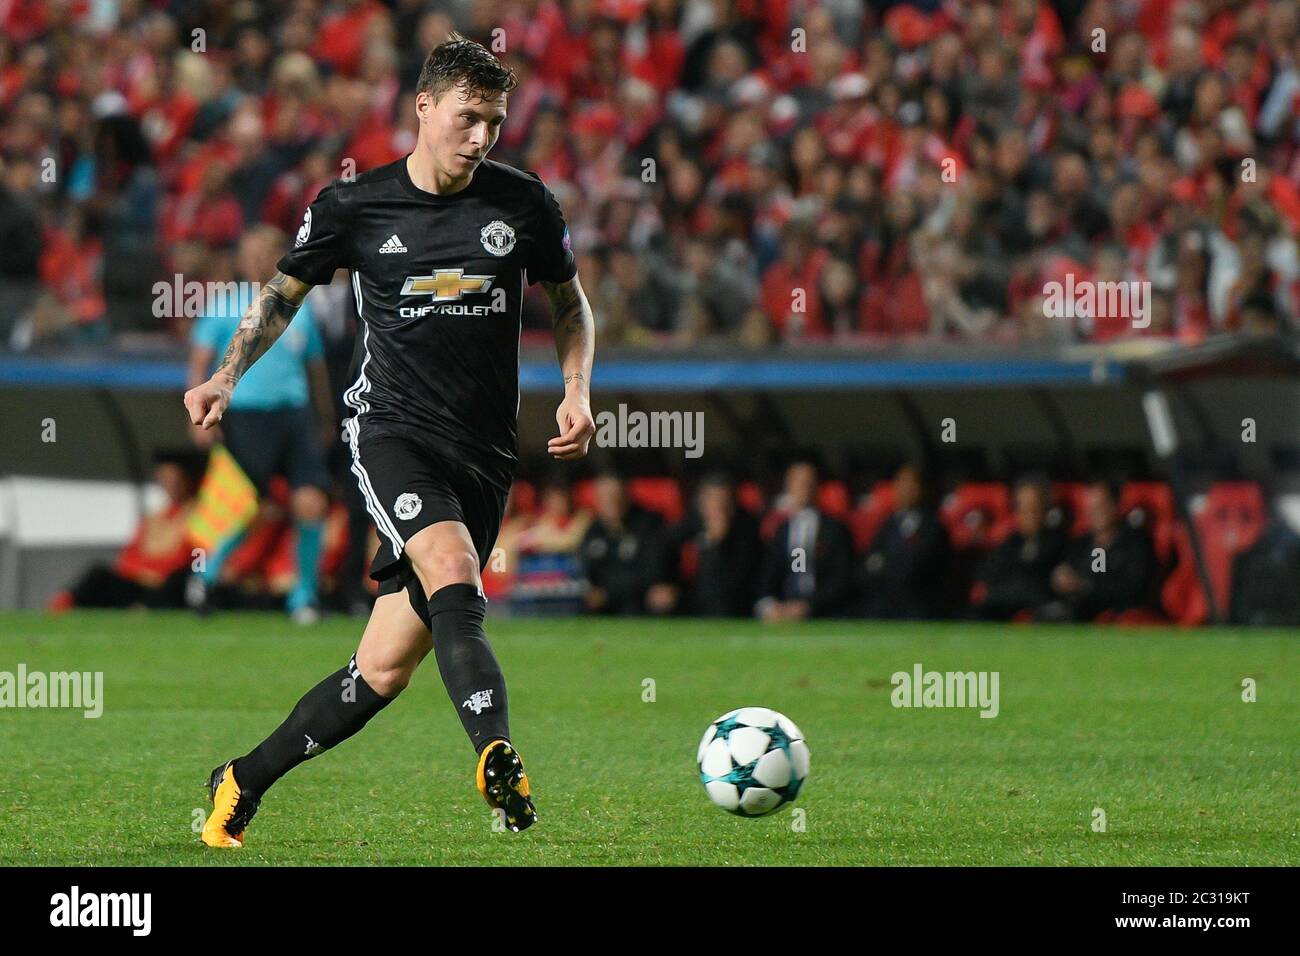 Victor Lindelof of Manchester United seen in action during the UEFA Champions League Group A stage match between Benfica and Manchester United at Estadio da Luz in Lisbon.(Final score: Benfica 0:1 Man United) Stock Photo